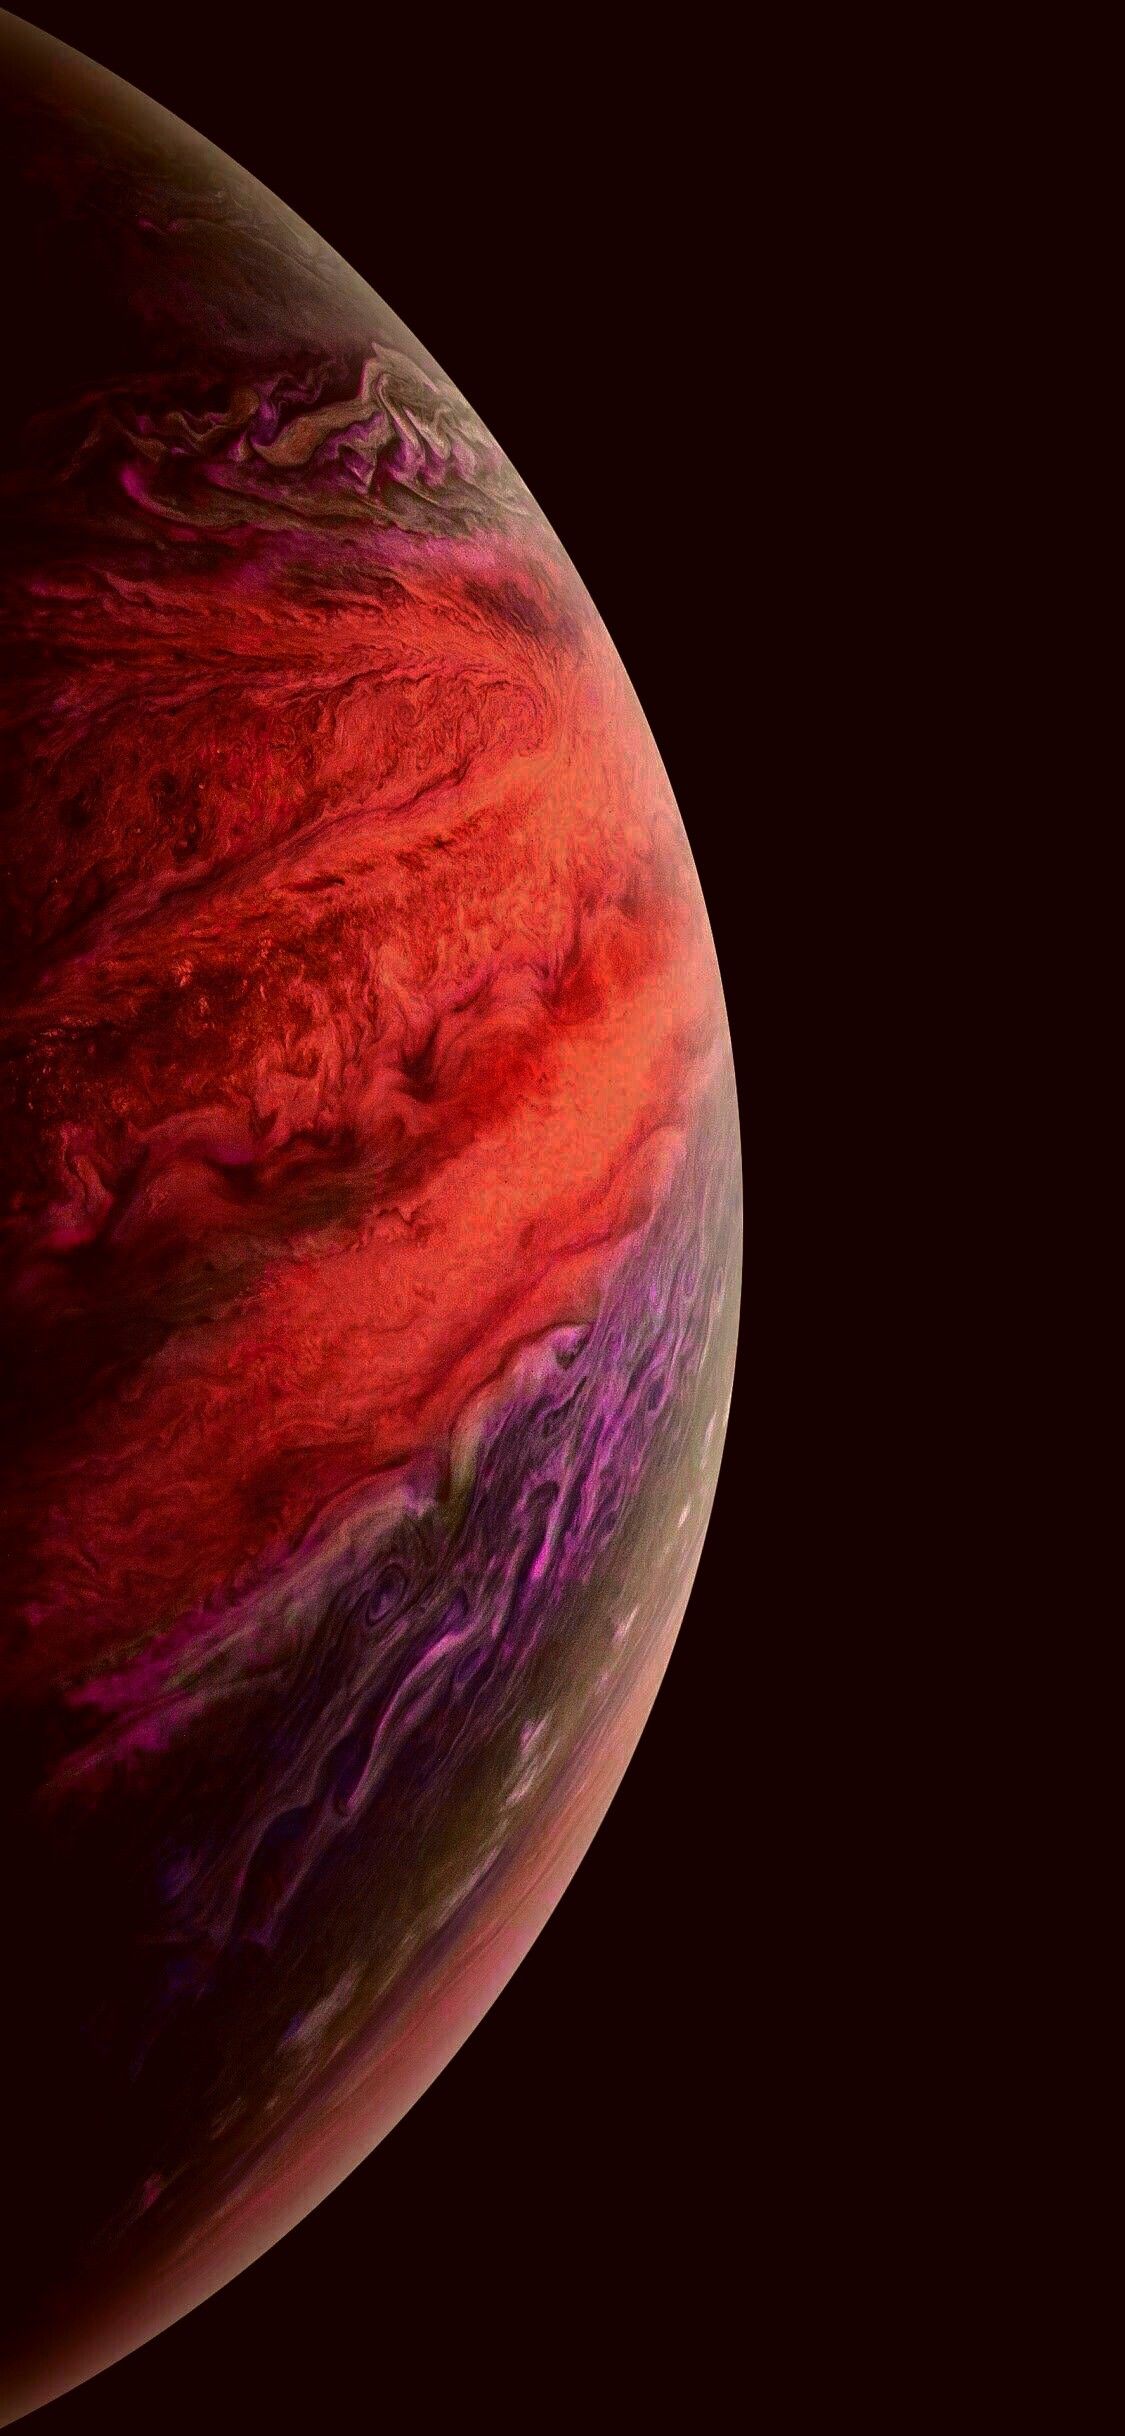 iPhone XS Wallpaper image by No Apple wallpaper iphone